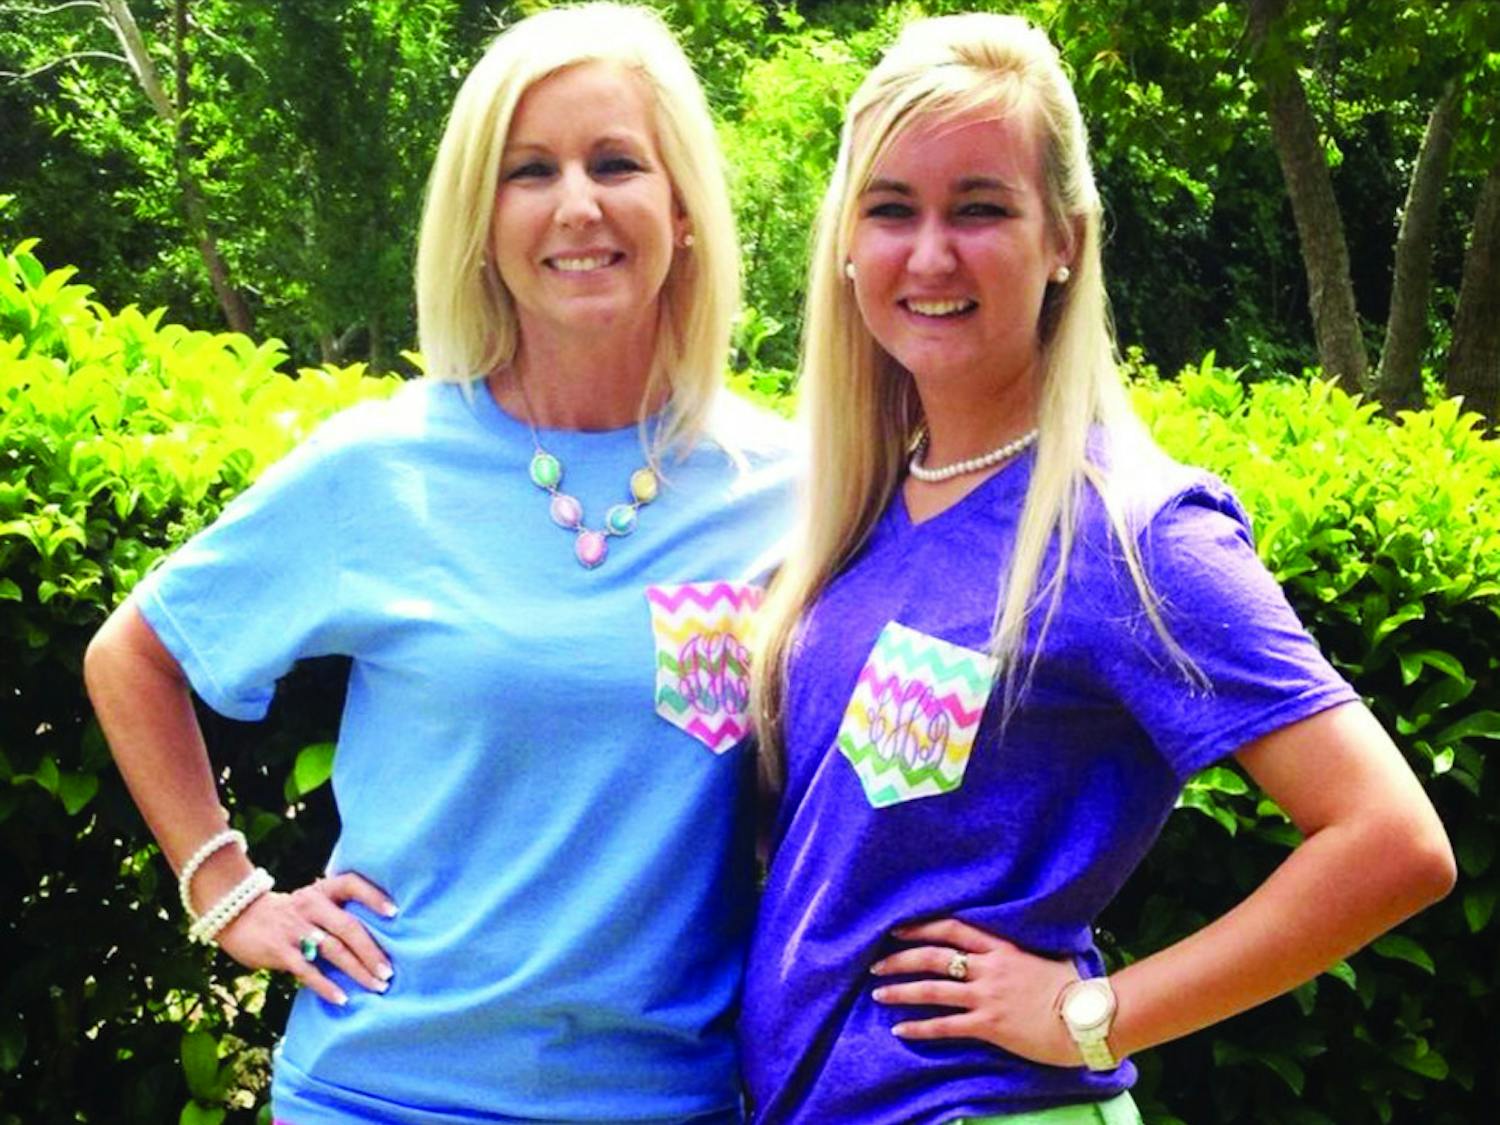 Telecommunication junior Lindsie Herring, 21, right, poses with her mother, Judith Herring, left. Lindsie Herring started Sweet Southern Tees in February.